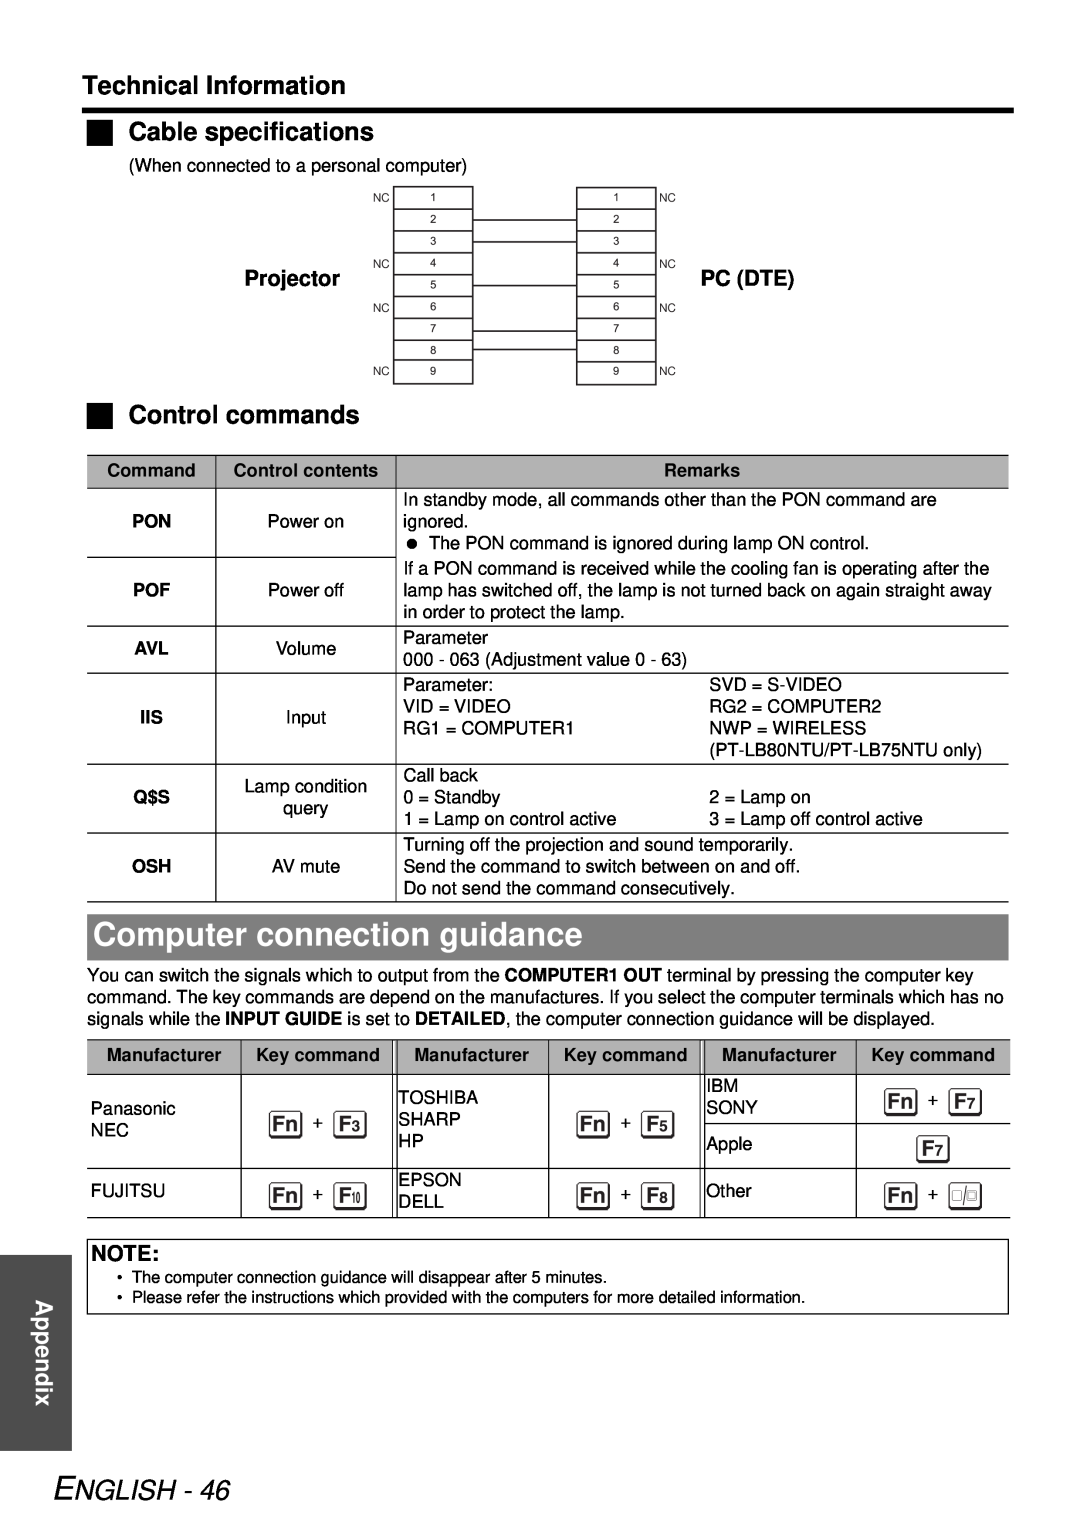 Panasonic PT-LB78U Computer connection guidance, Technical Information Cable specifications, Control commands, English 